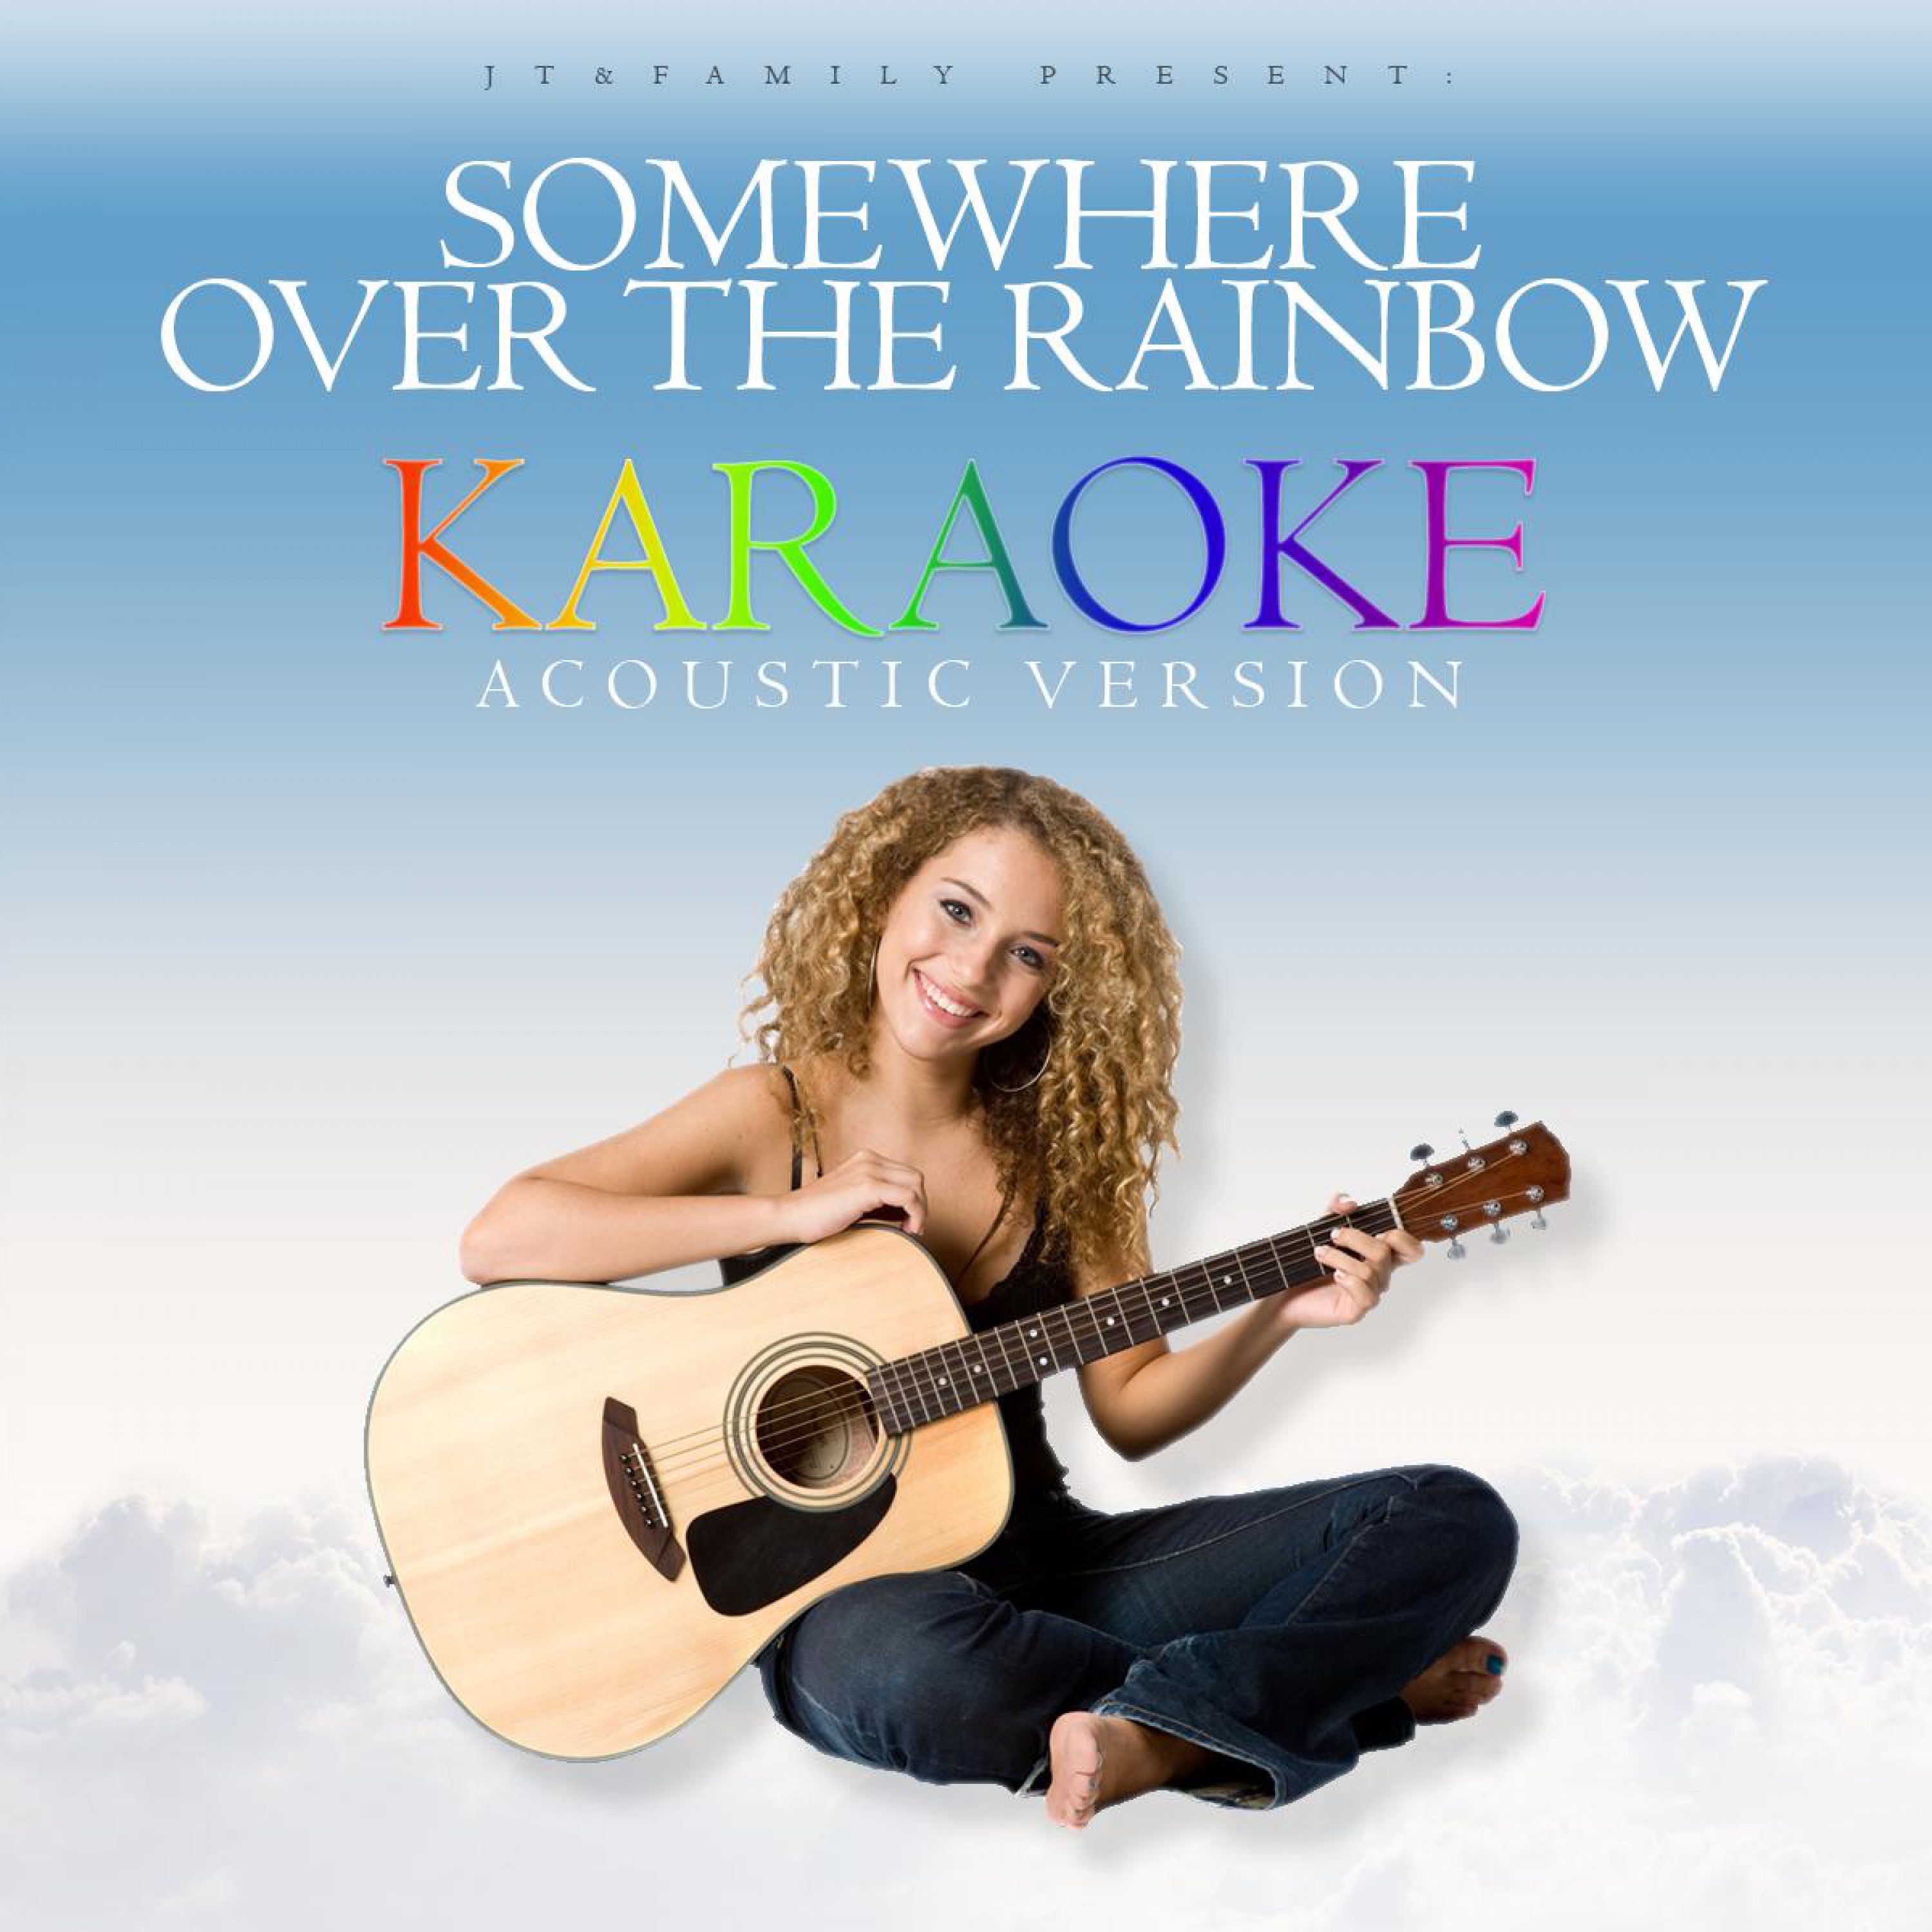 Somewhere over the Rainbow (In the Style of Israel Kamakawiwo'ole)